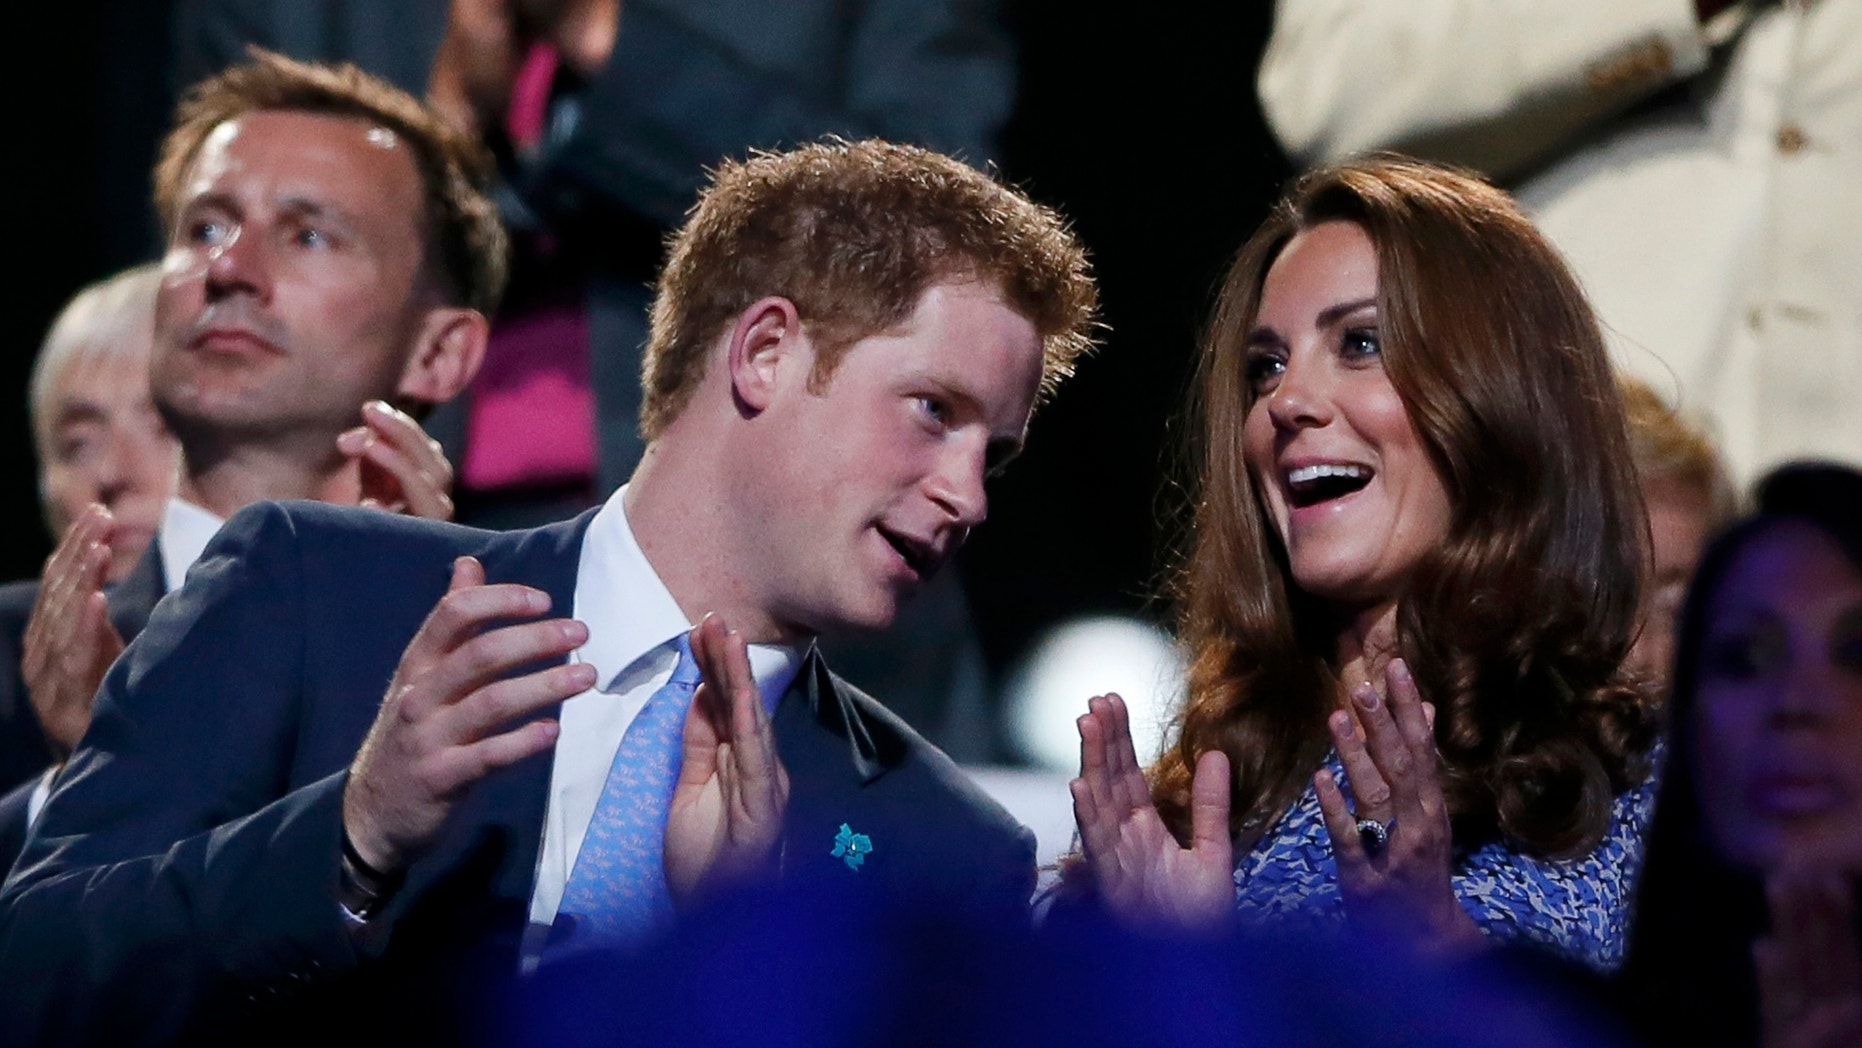 Photos Surface Of Naked Prince Harry Partying With Equally Naked Woman 